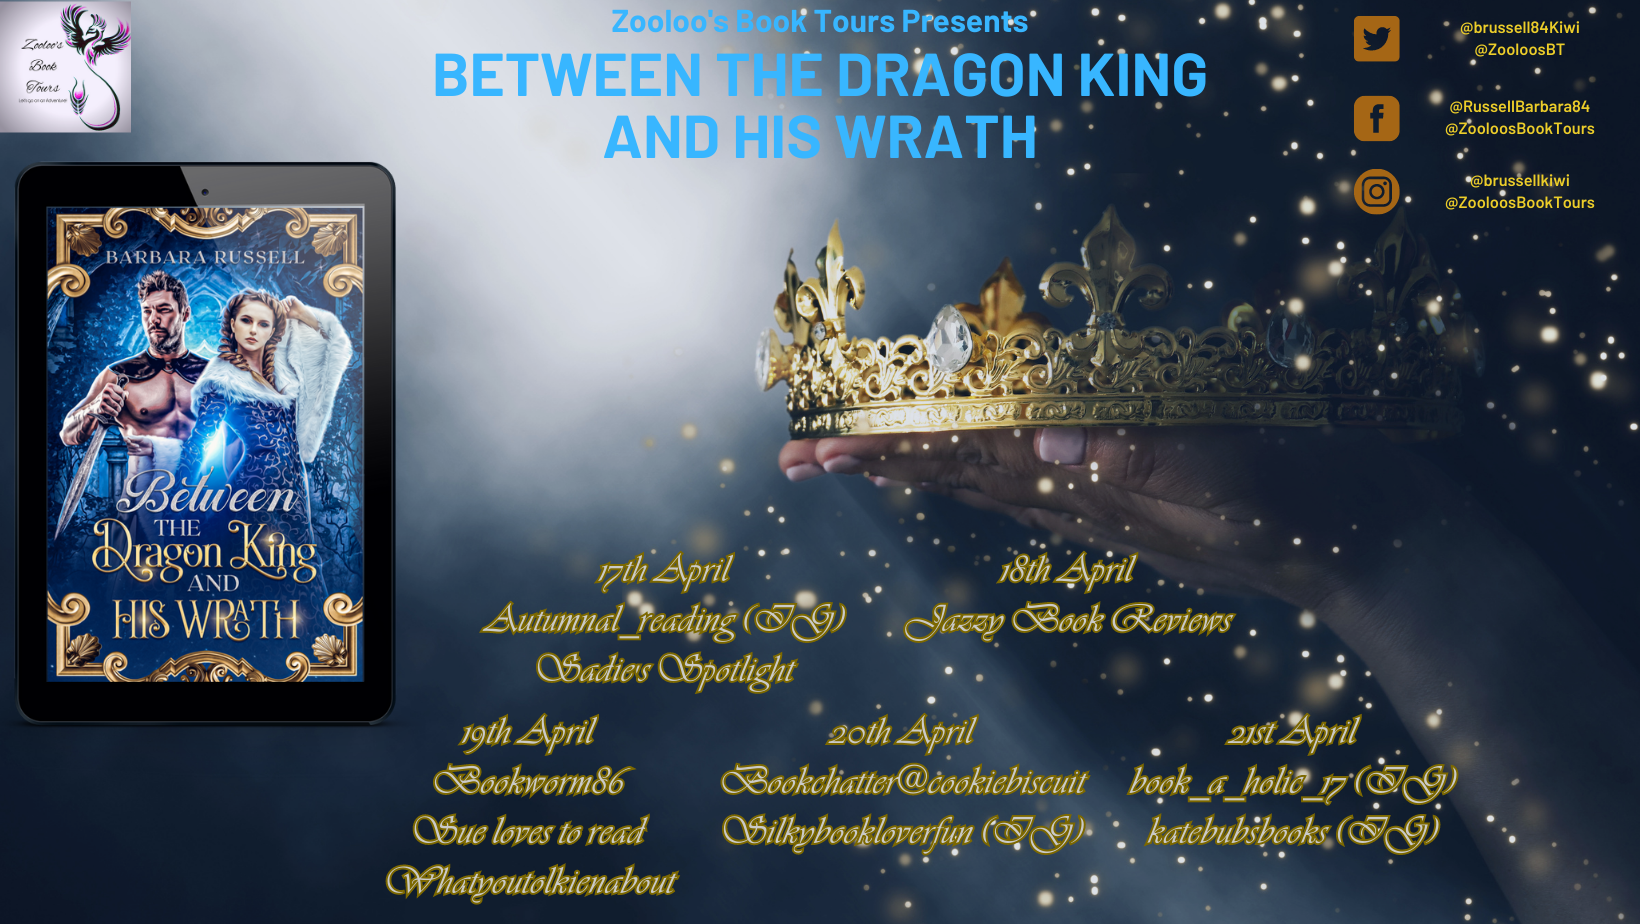 Between The Dragon King and His Wrath Tour Poster